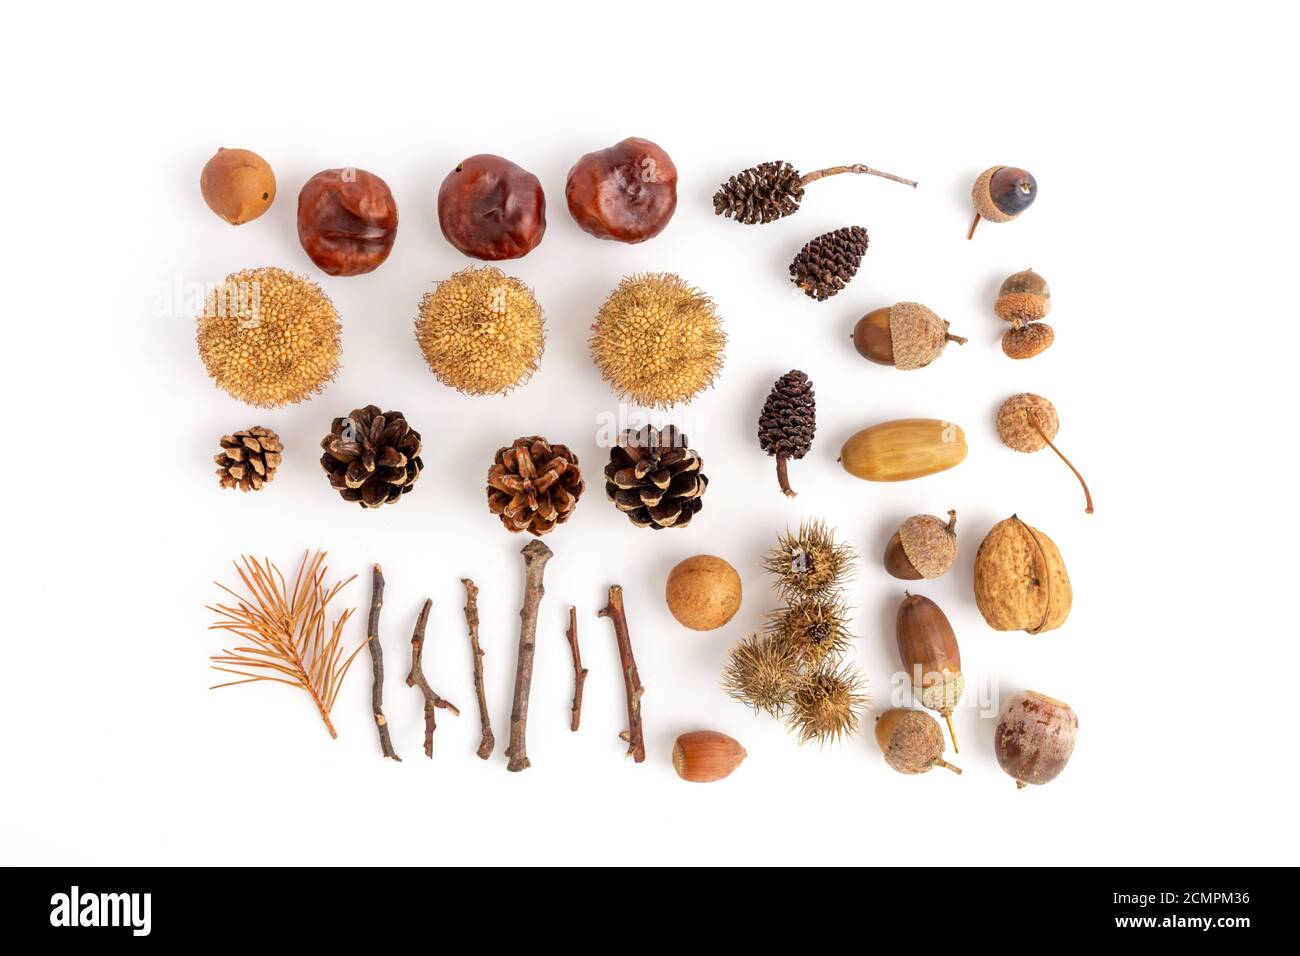 a set for children's crafts made from natural materials, acorns, chestnuts, cones and other forest materials, autumn flat lay Stock Photo